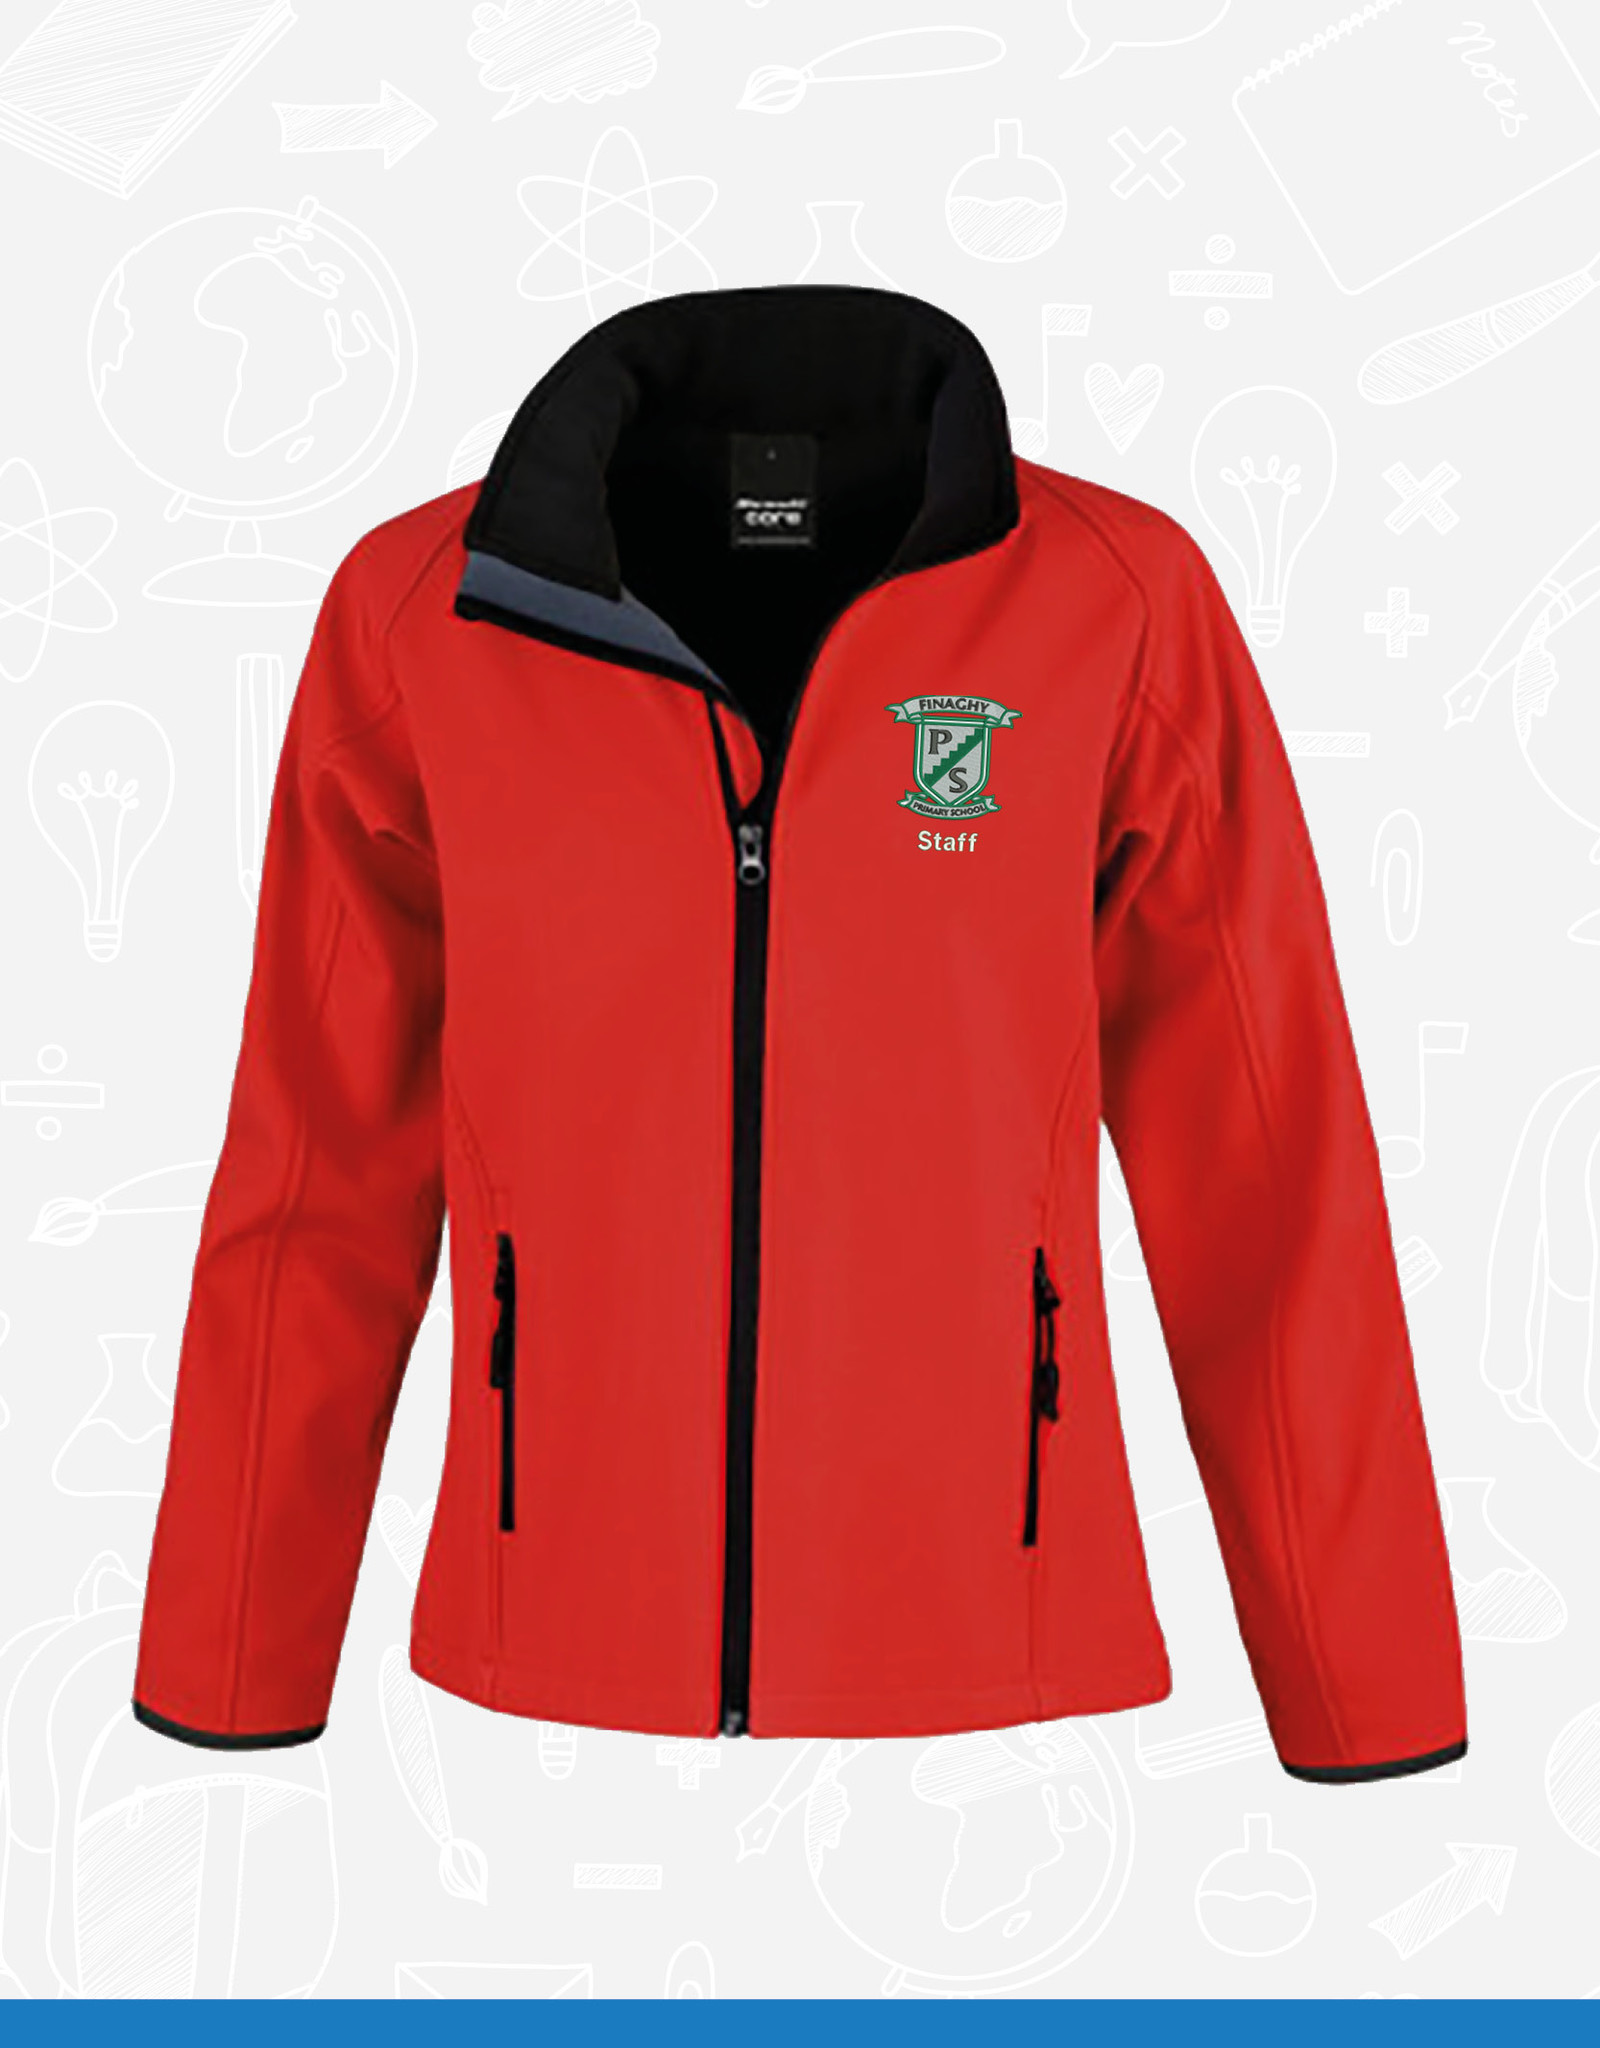 Russell Finaghy Primary Staff Ladies Soft Shell (RS231F)